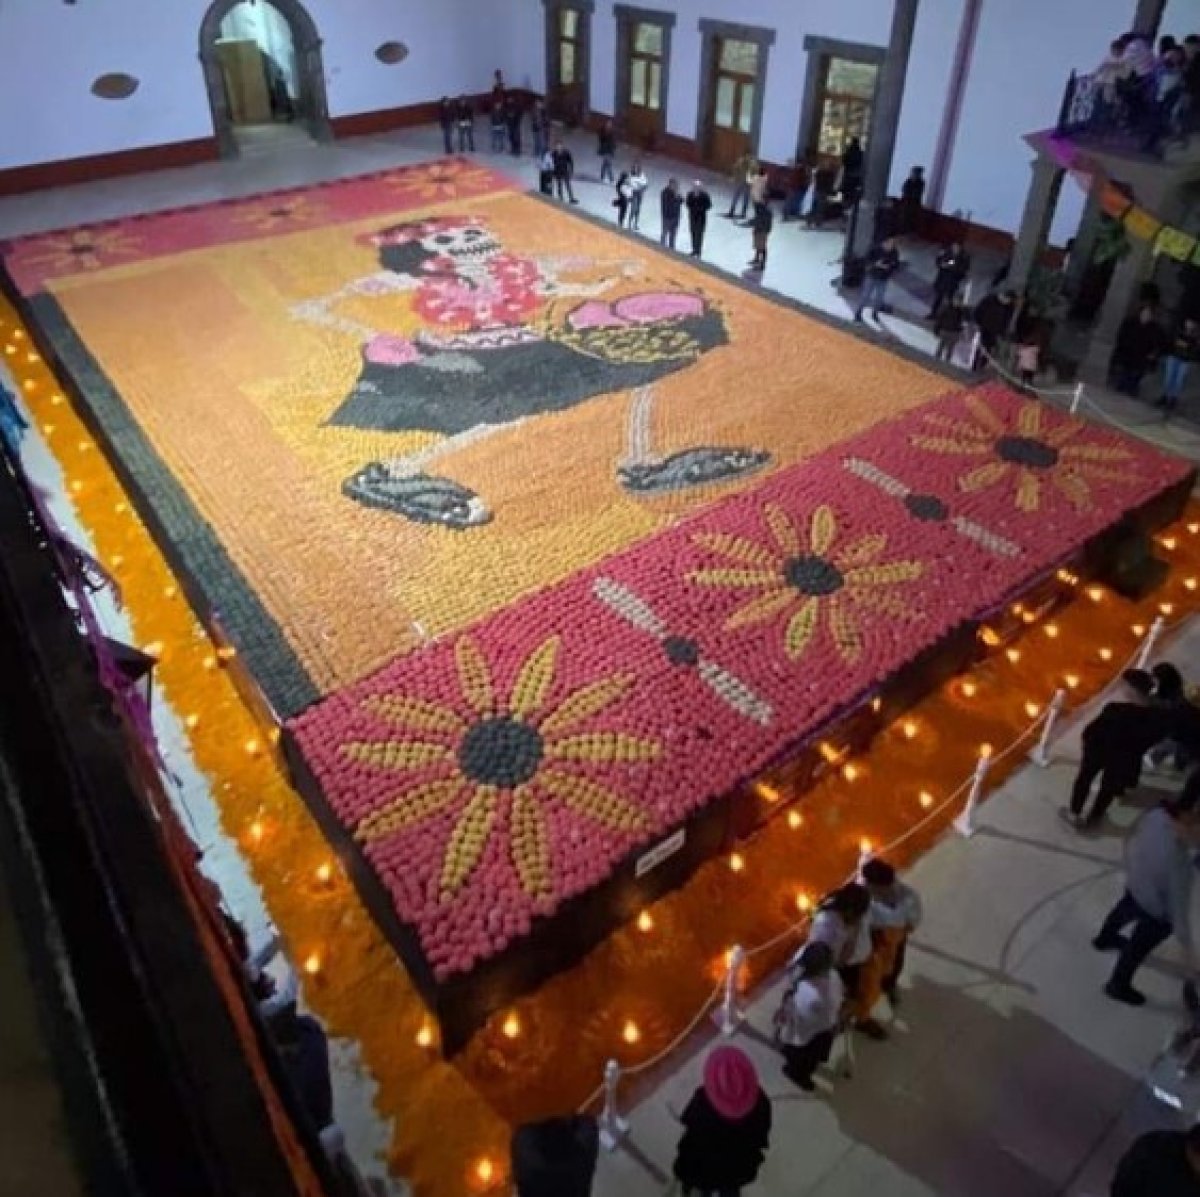 Mosaic painting was made from more than 20 thousand colored bread in Mexico #1